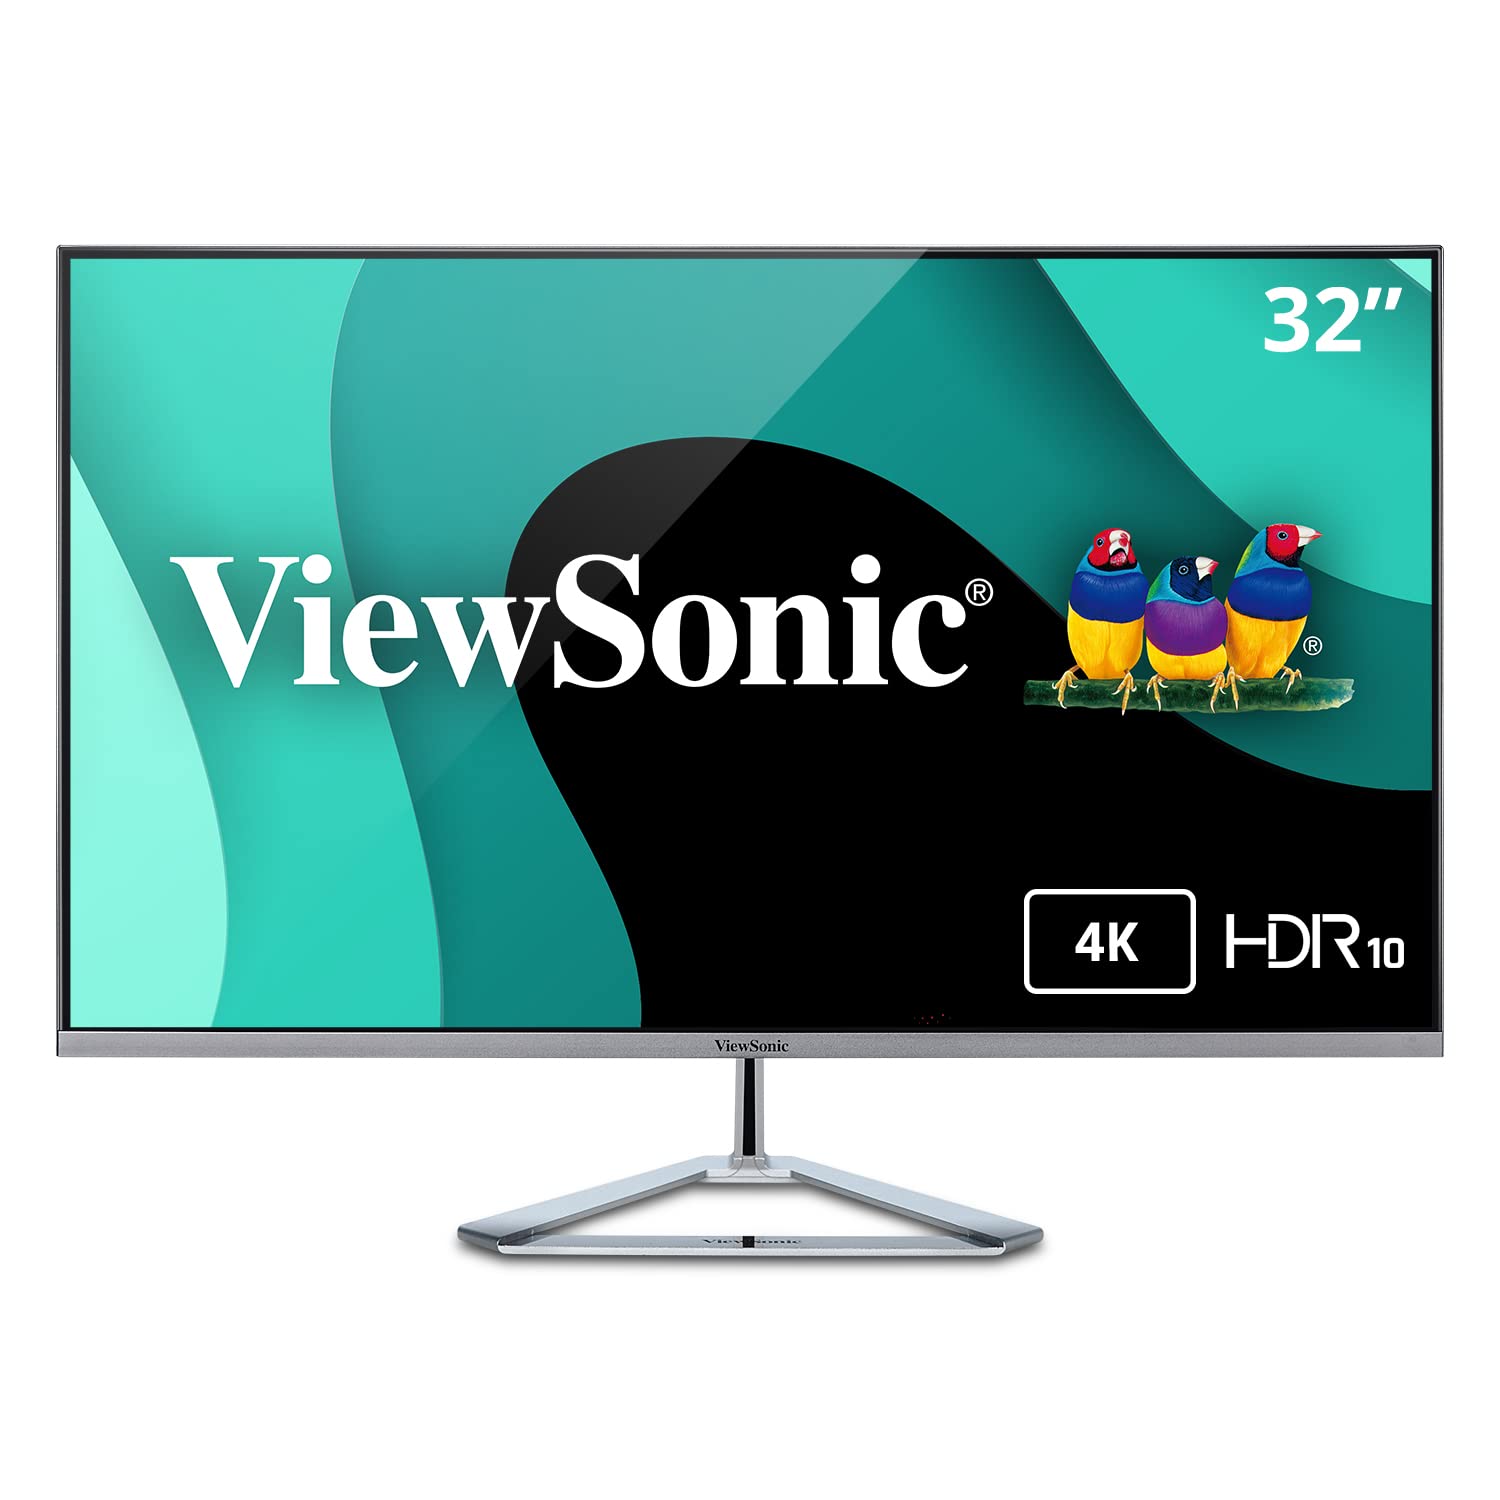 ViewSonic VX3276-4K-MHD 32 Inch Frameless 4K UHD Monitor with HDR10 HDMI and DisplayPort for Home and OfficeGray並行輸入